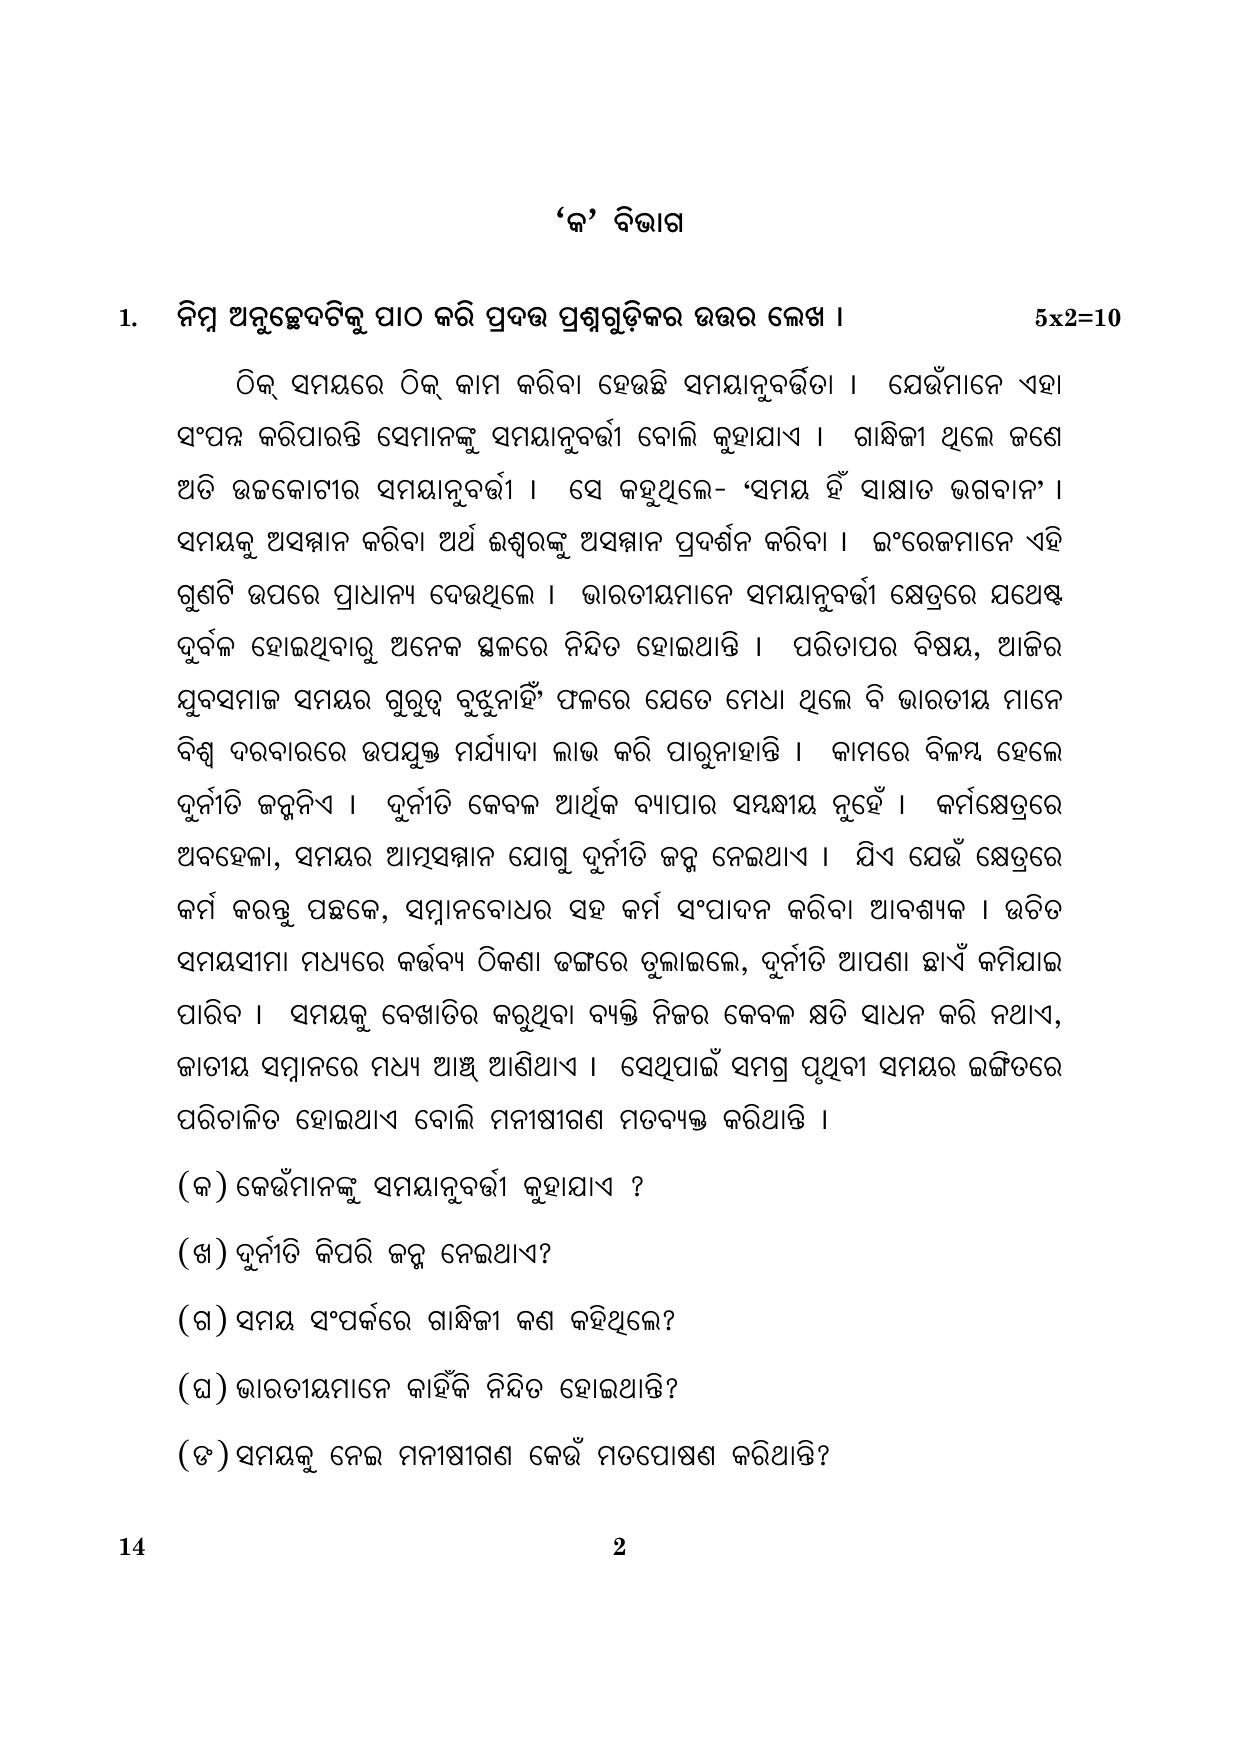 CBSE Class 10 014 Odia 2016 Question Paper - Page 2